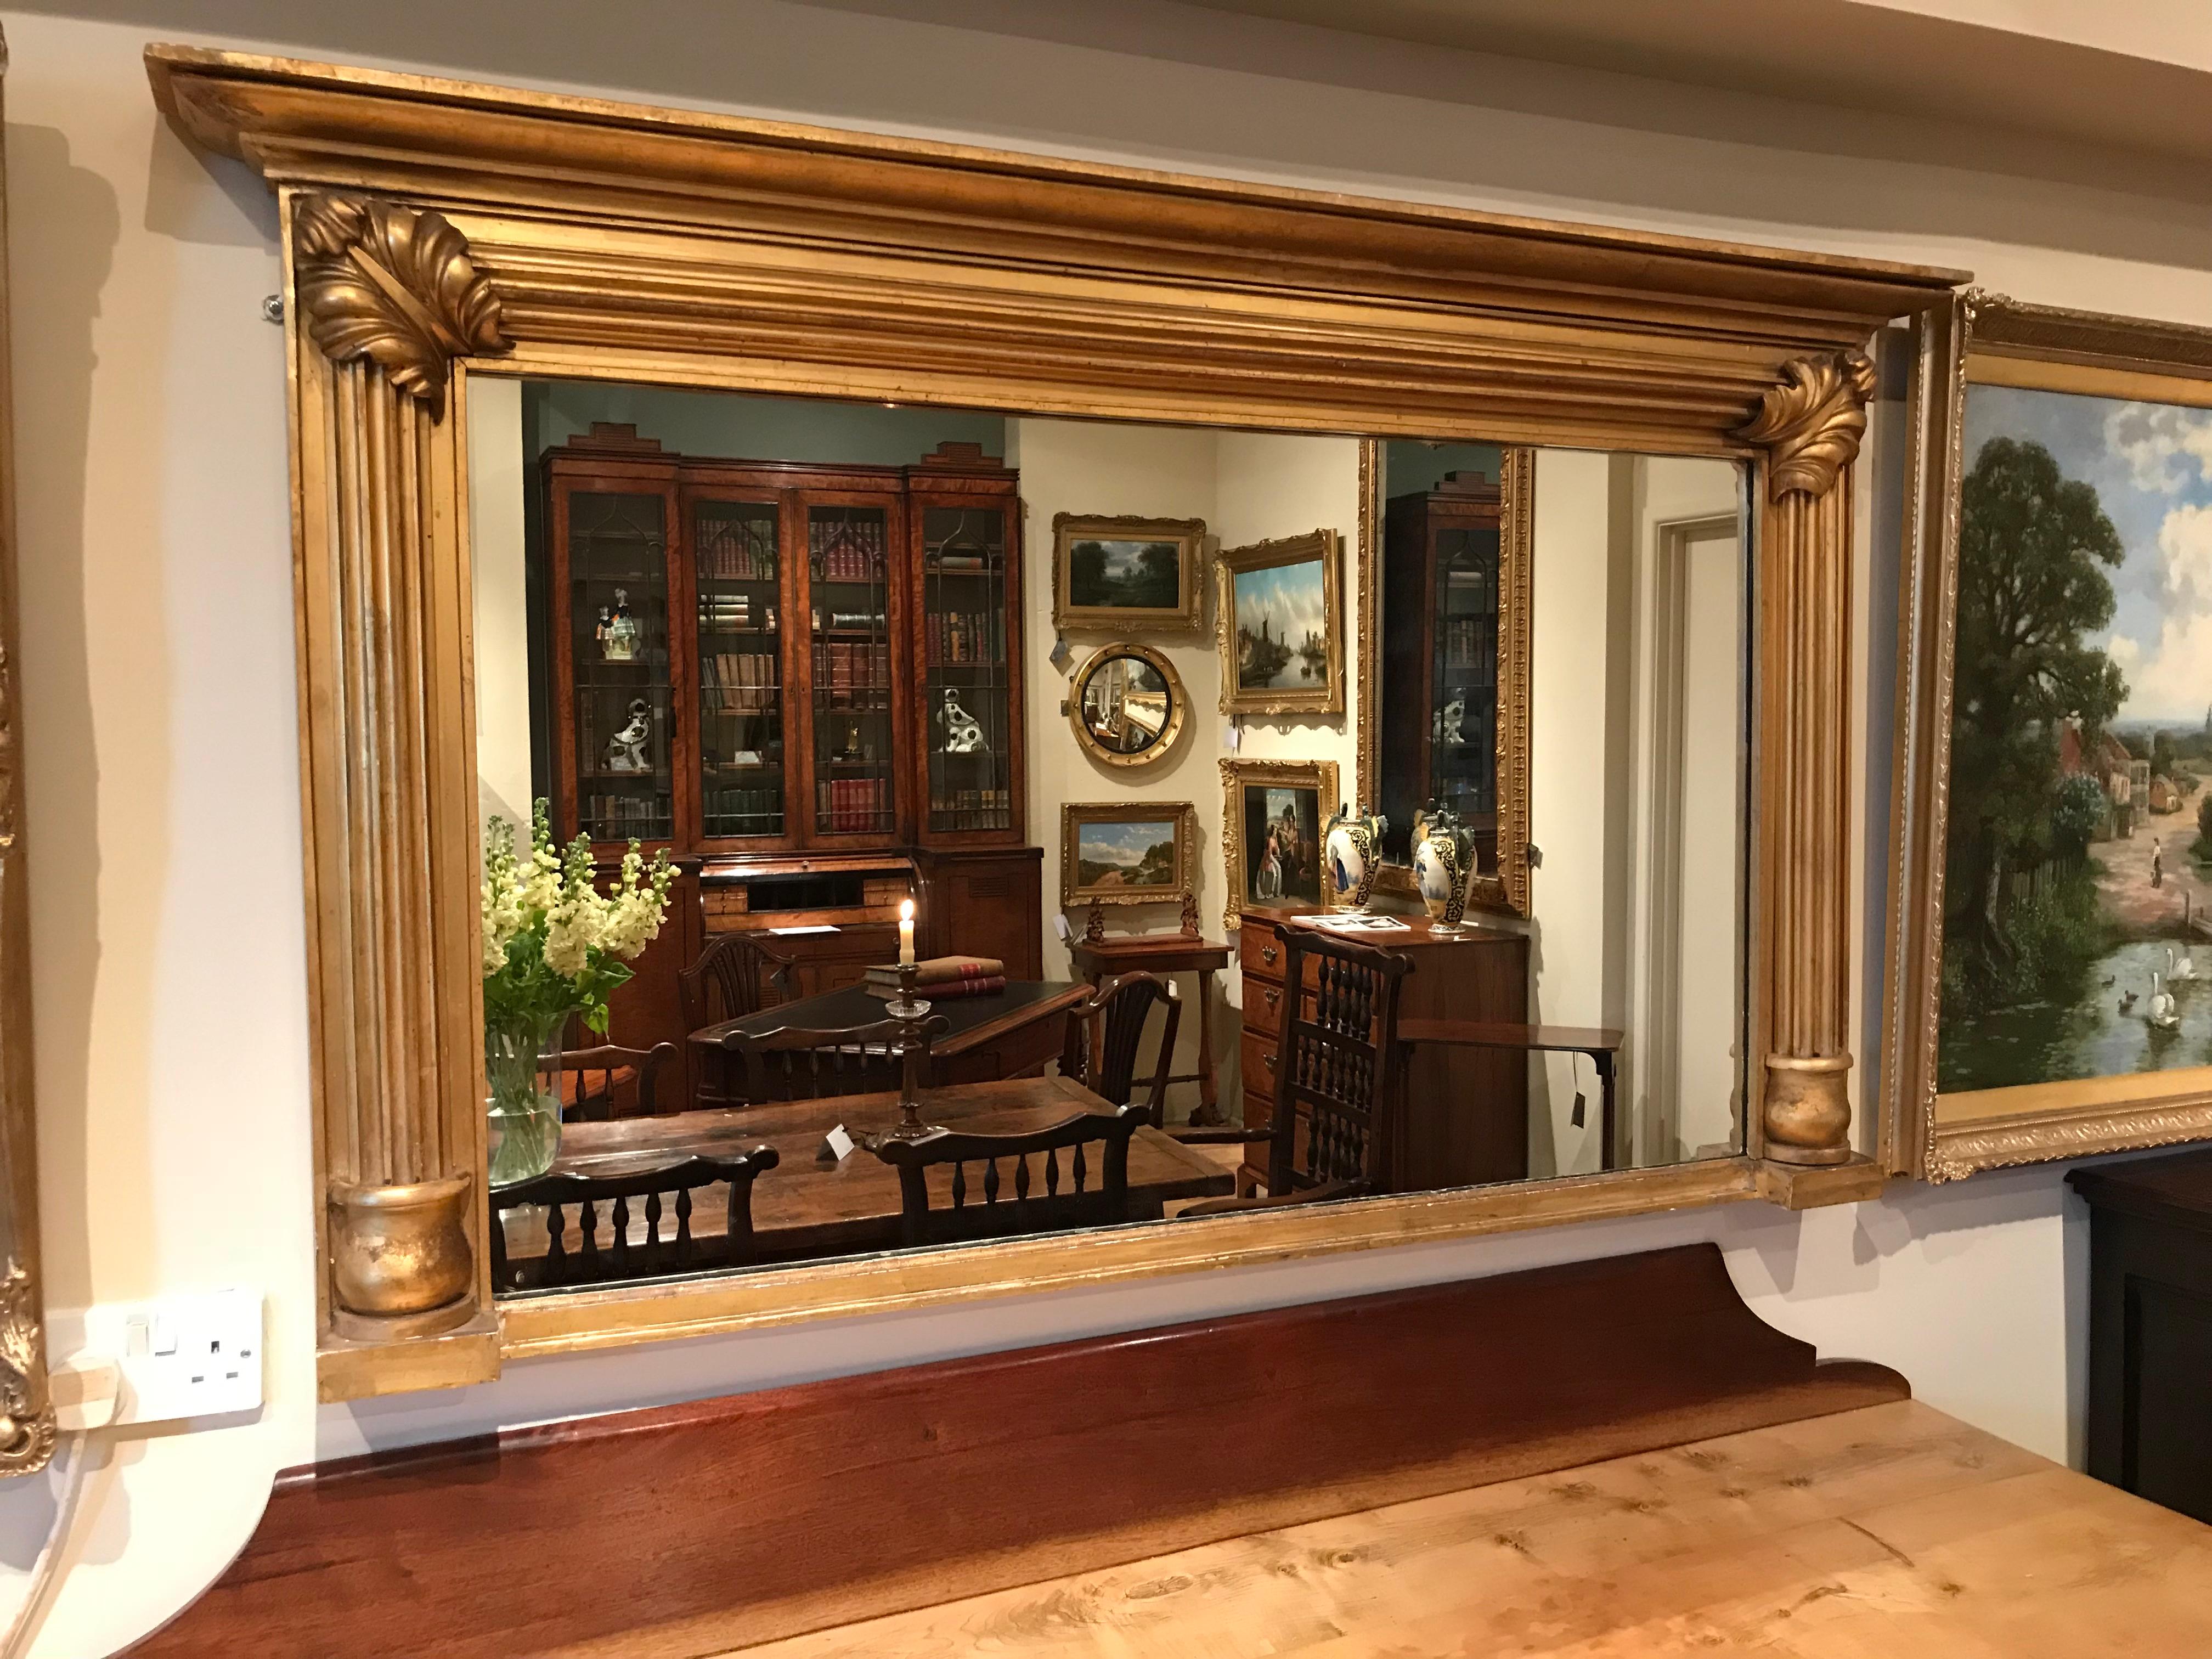 19th century large giltwood rectangular overmantel mirror, with a projecting moulded cornice, the inset mirror plate flanked by fluted half columns with applied acanthus leaf decoration.